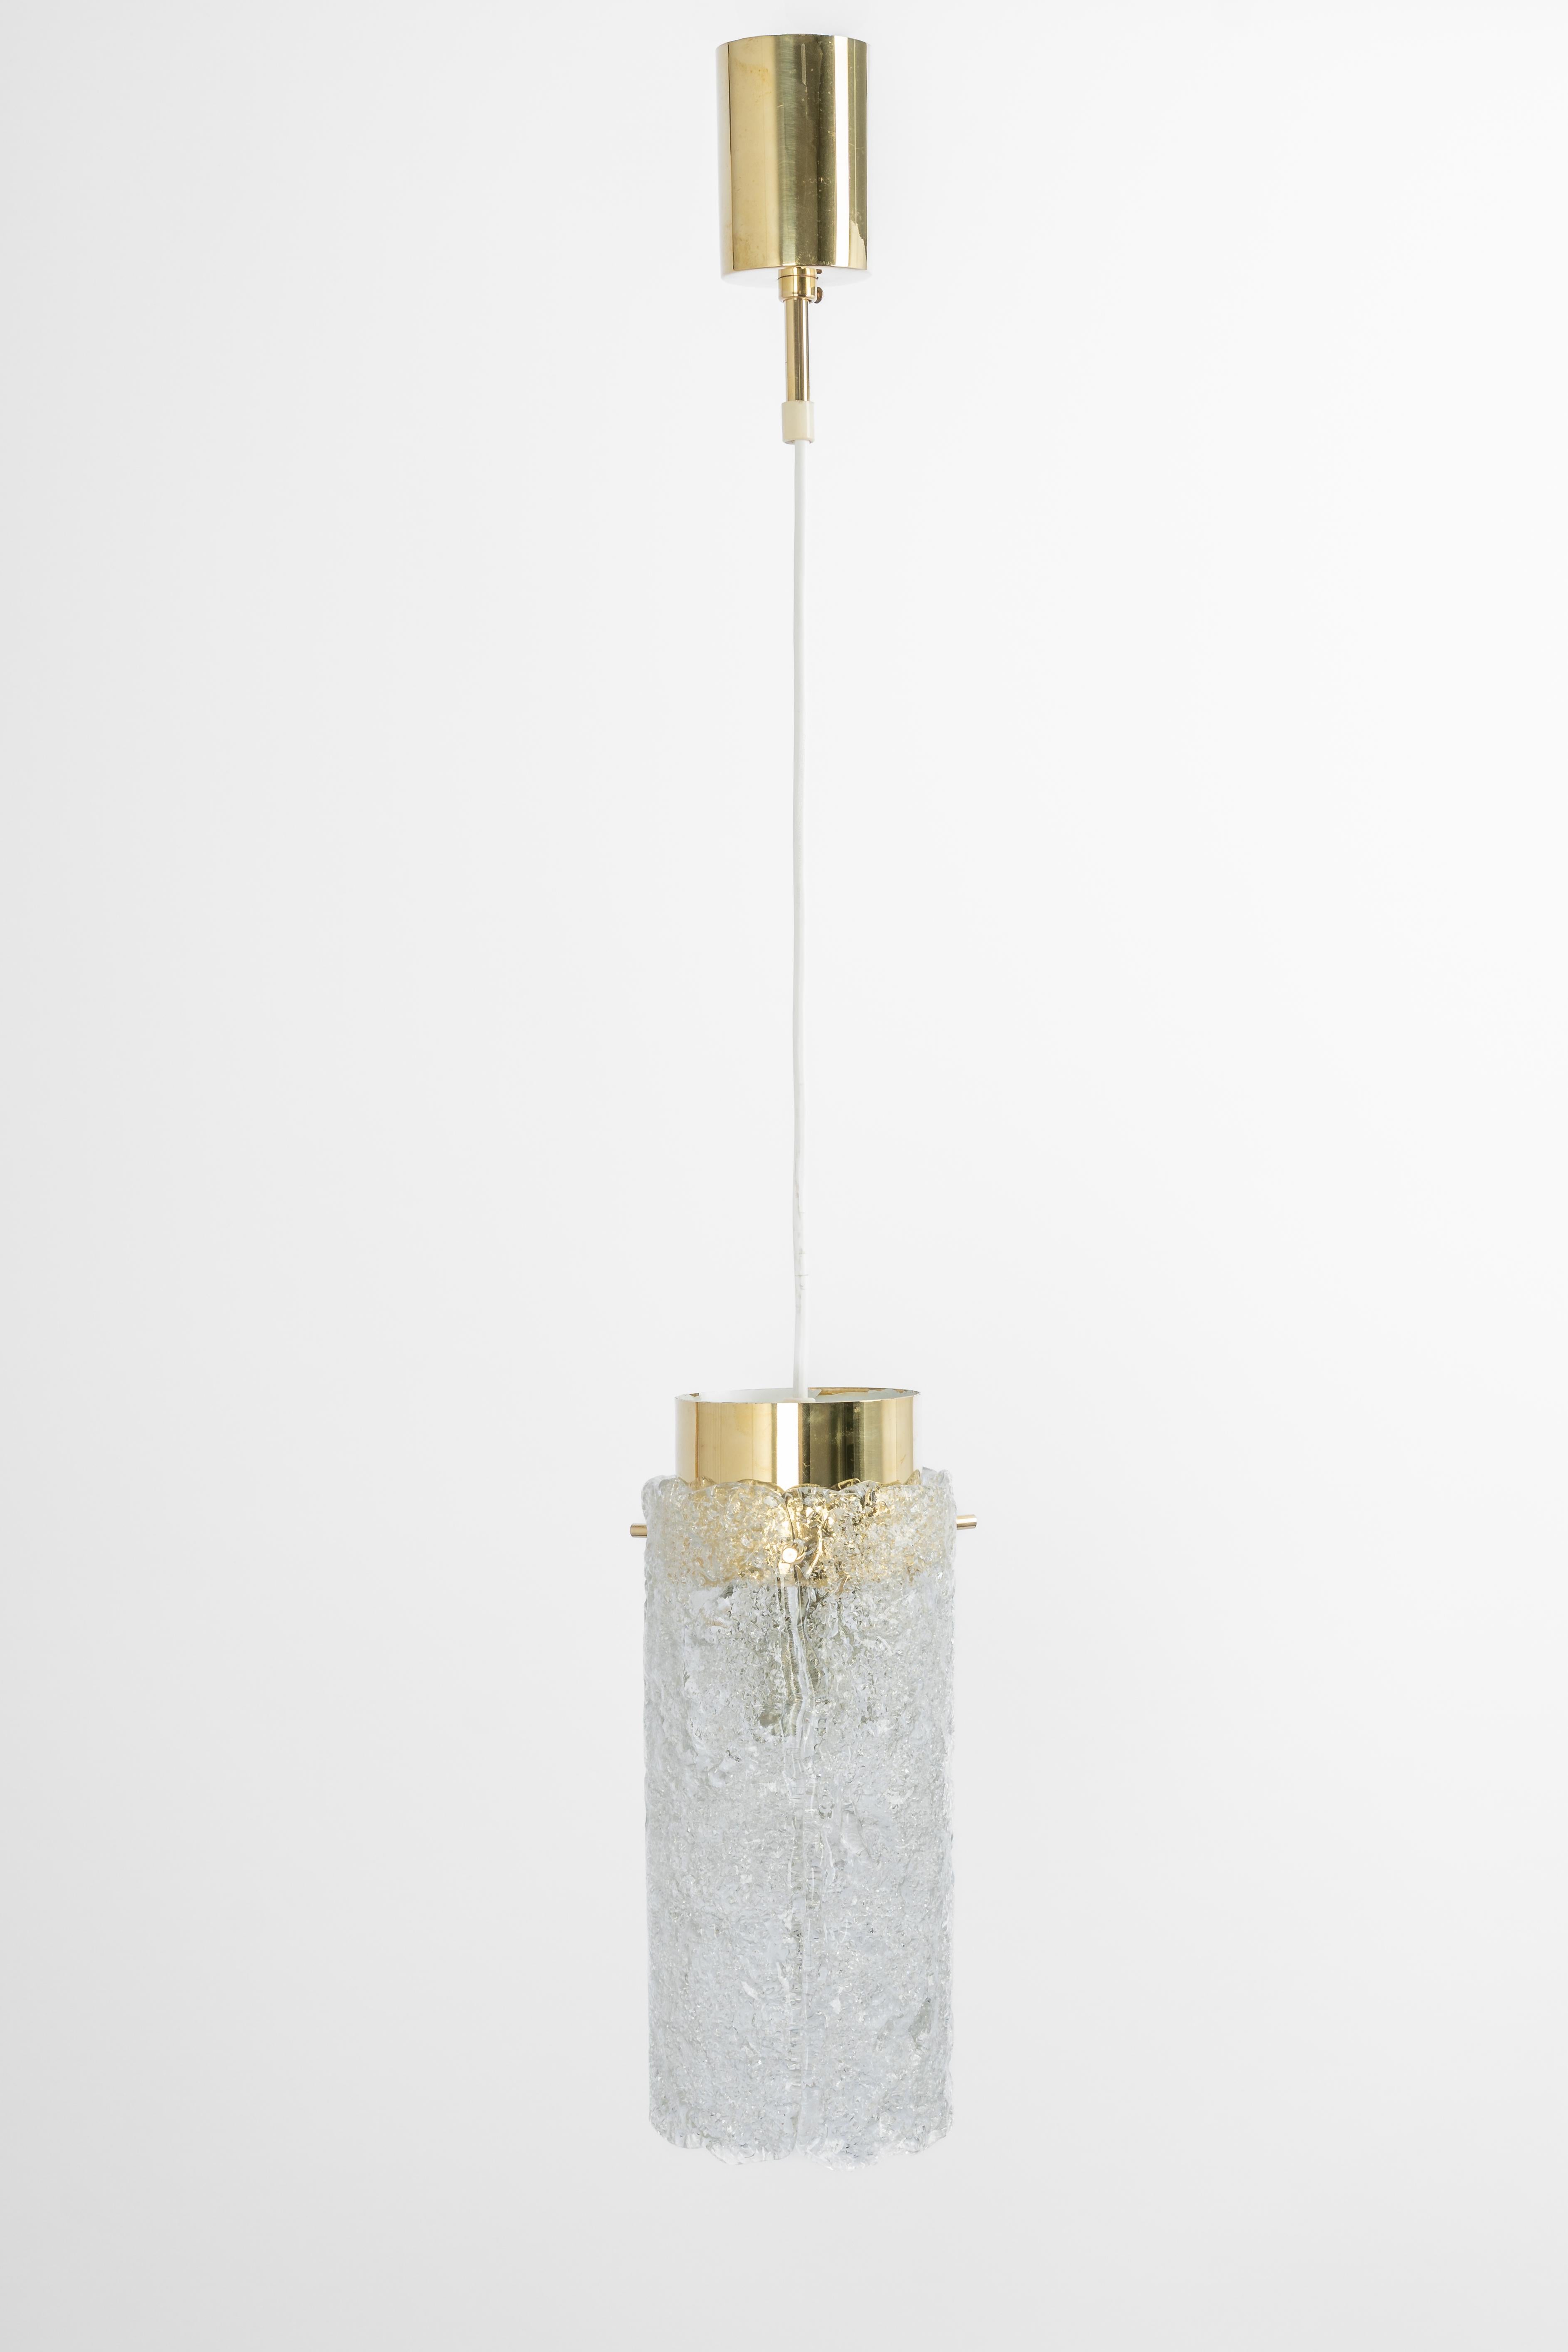 Late 20th Century 1 of 2 Petite Murano Pendant Lights by Hillebrand, 1960s For Sale